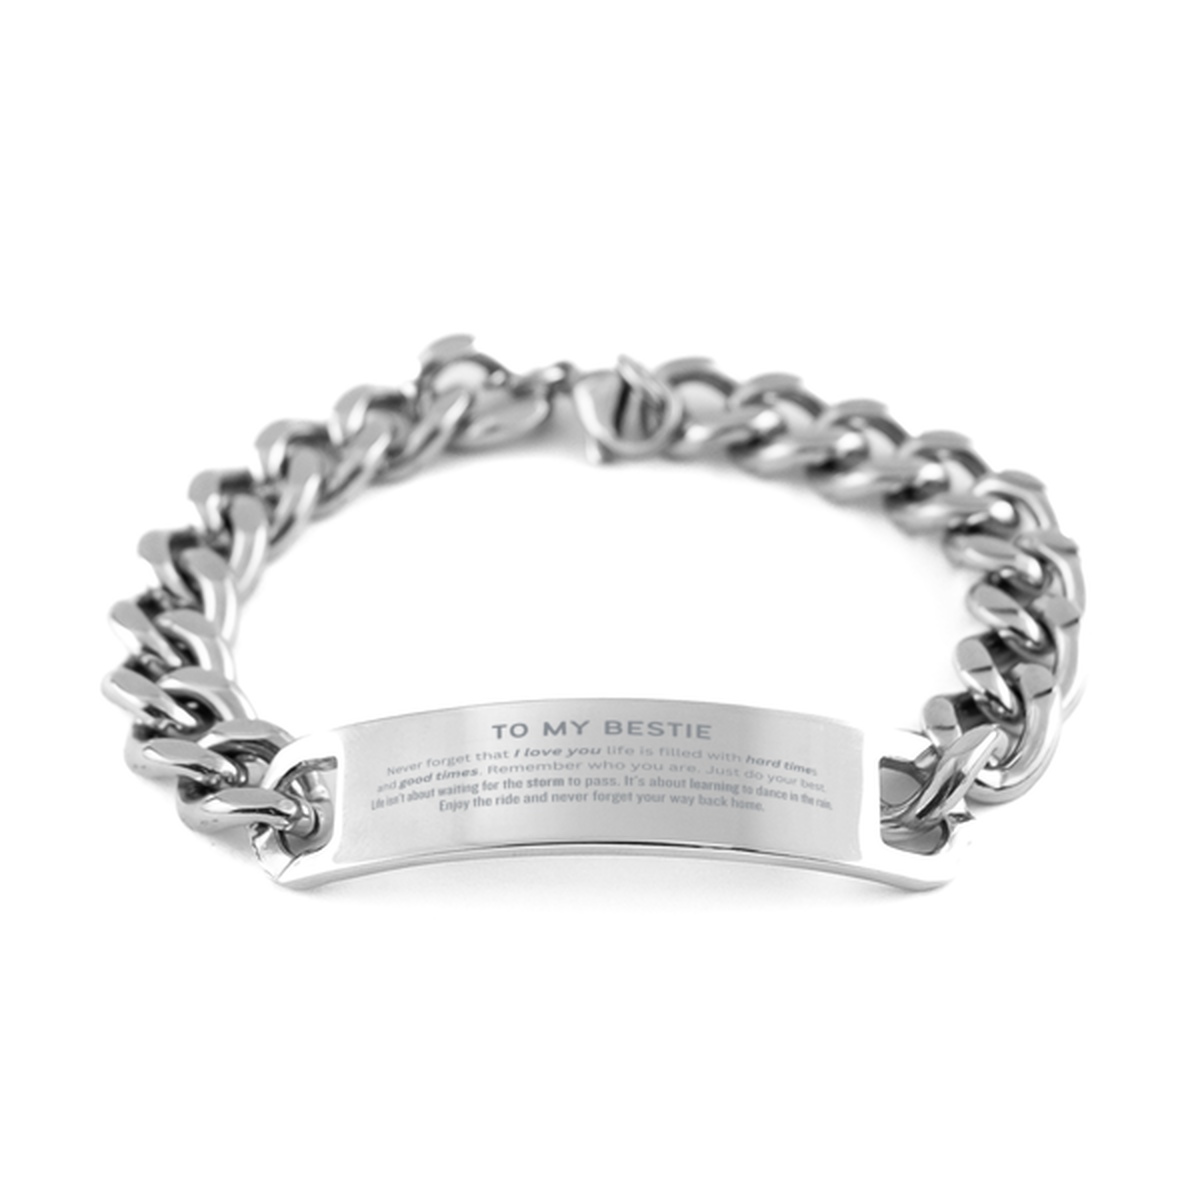 Christmas Bestie Cuban Chain Stainless Steel Bracelet Gifts, To My Bestie Birthday Thank You Gifts For Bestie, Graduation Unique Gifts For Bestie To My Bestie Never forget that I love you life is filled with hard times and good times. Remember who you are